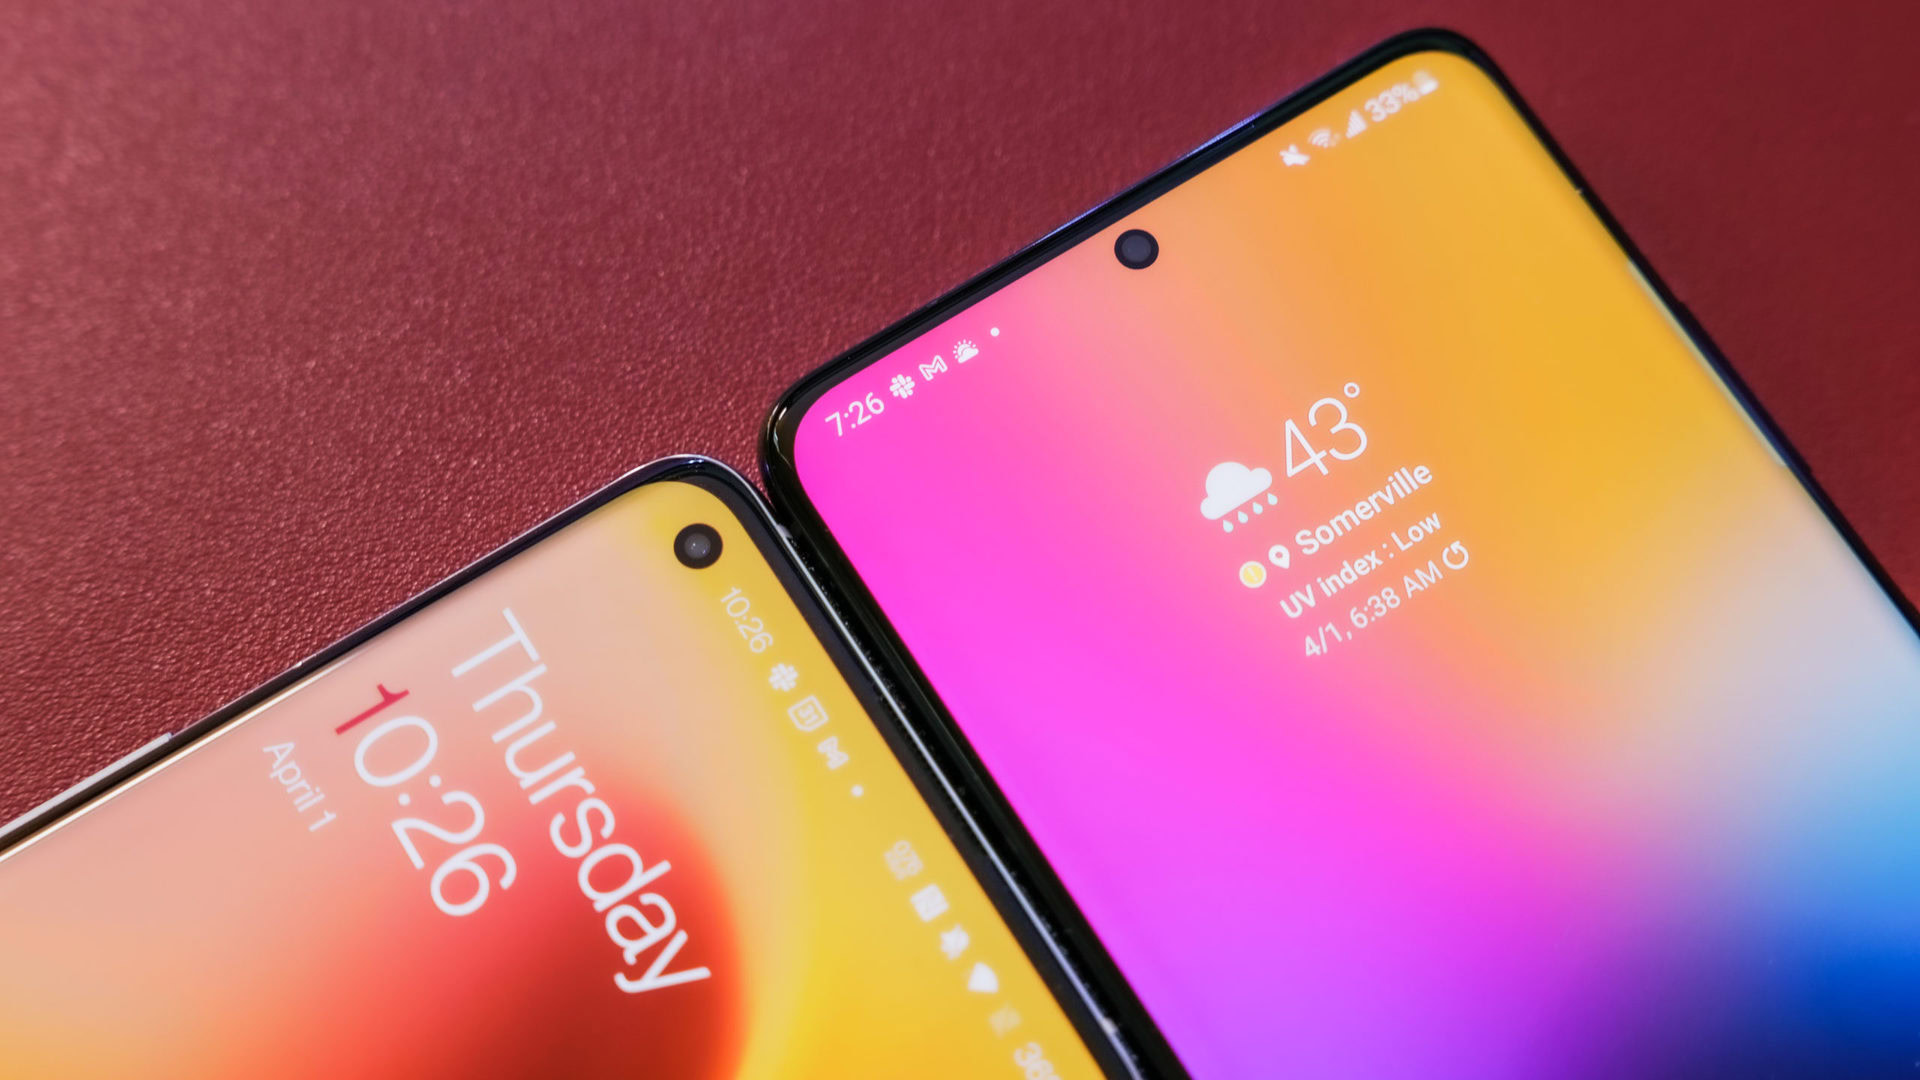 OnePlus 9 Pro vs Samsung Galaxy S21 Ultra displays on red background